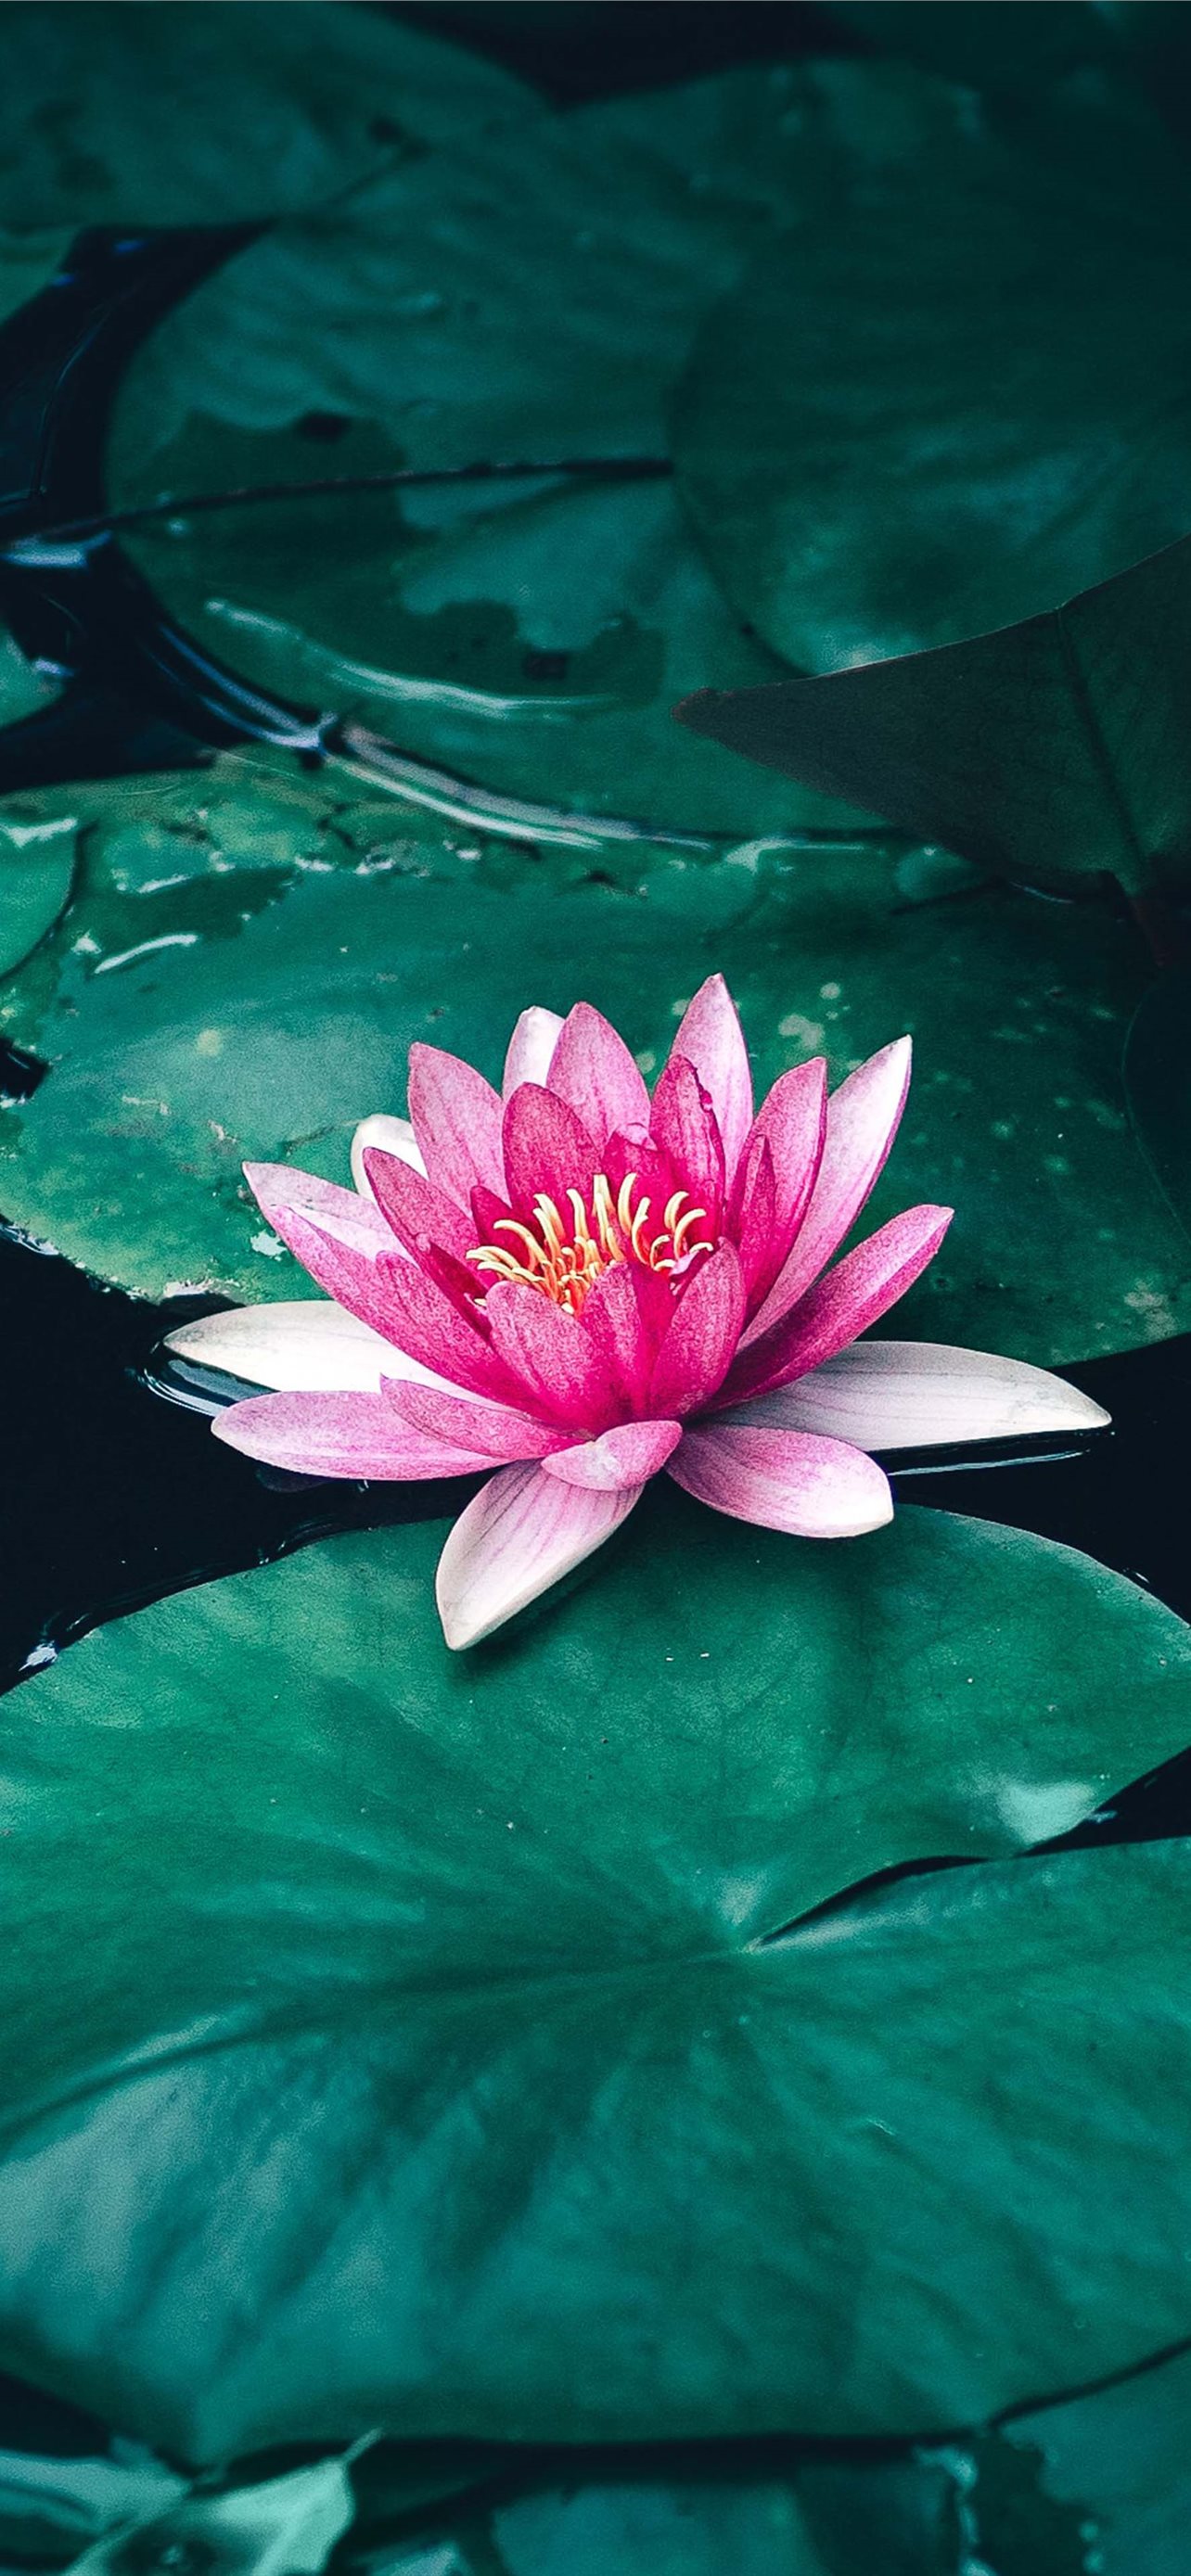 Pink Lotus Flowers With Leaves On Water With Reflection 4K HD Flowers  Wallpapers | HD Wallpapers | ID #63719